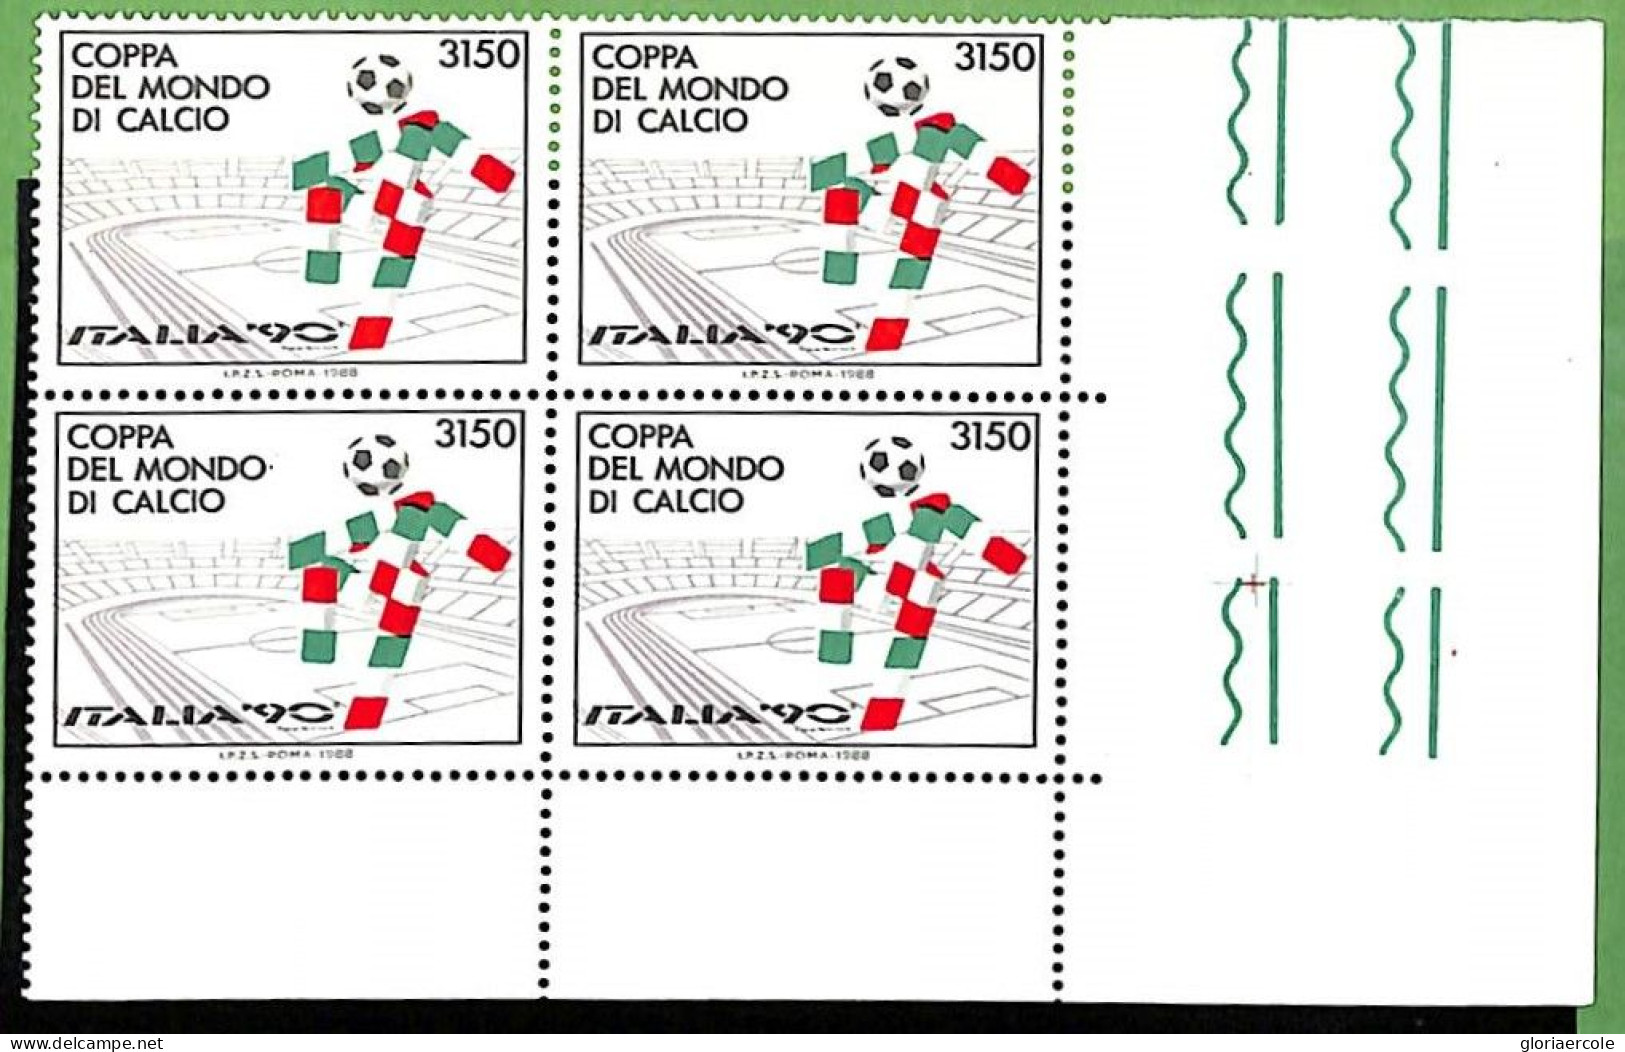 A1199 - ITALY - STAMPS - FOOTBALL  1990 Block Of 4 DOUBLE PRINT ERROR - Raybaudi - Neufs